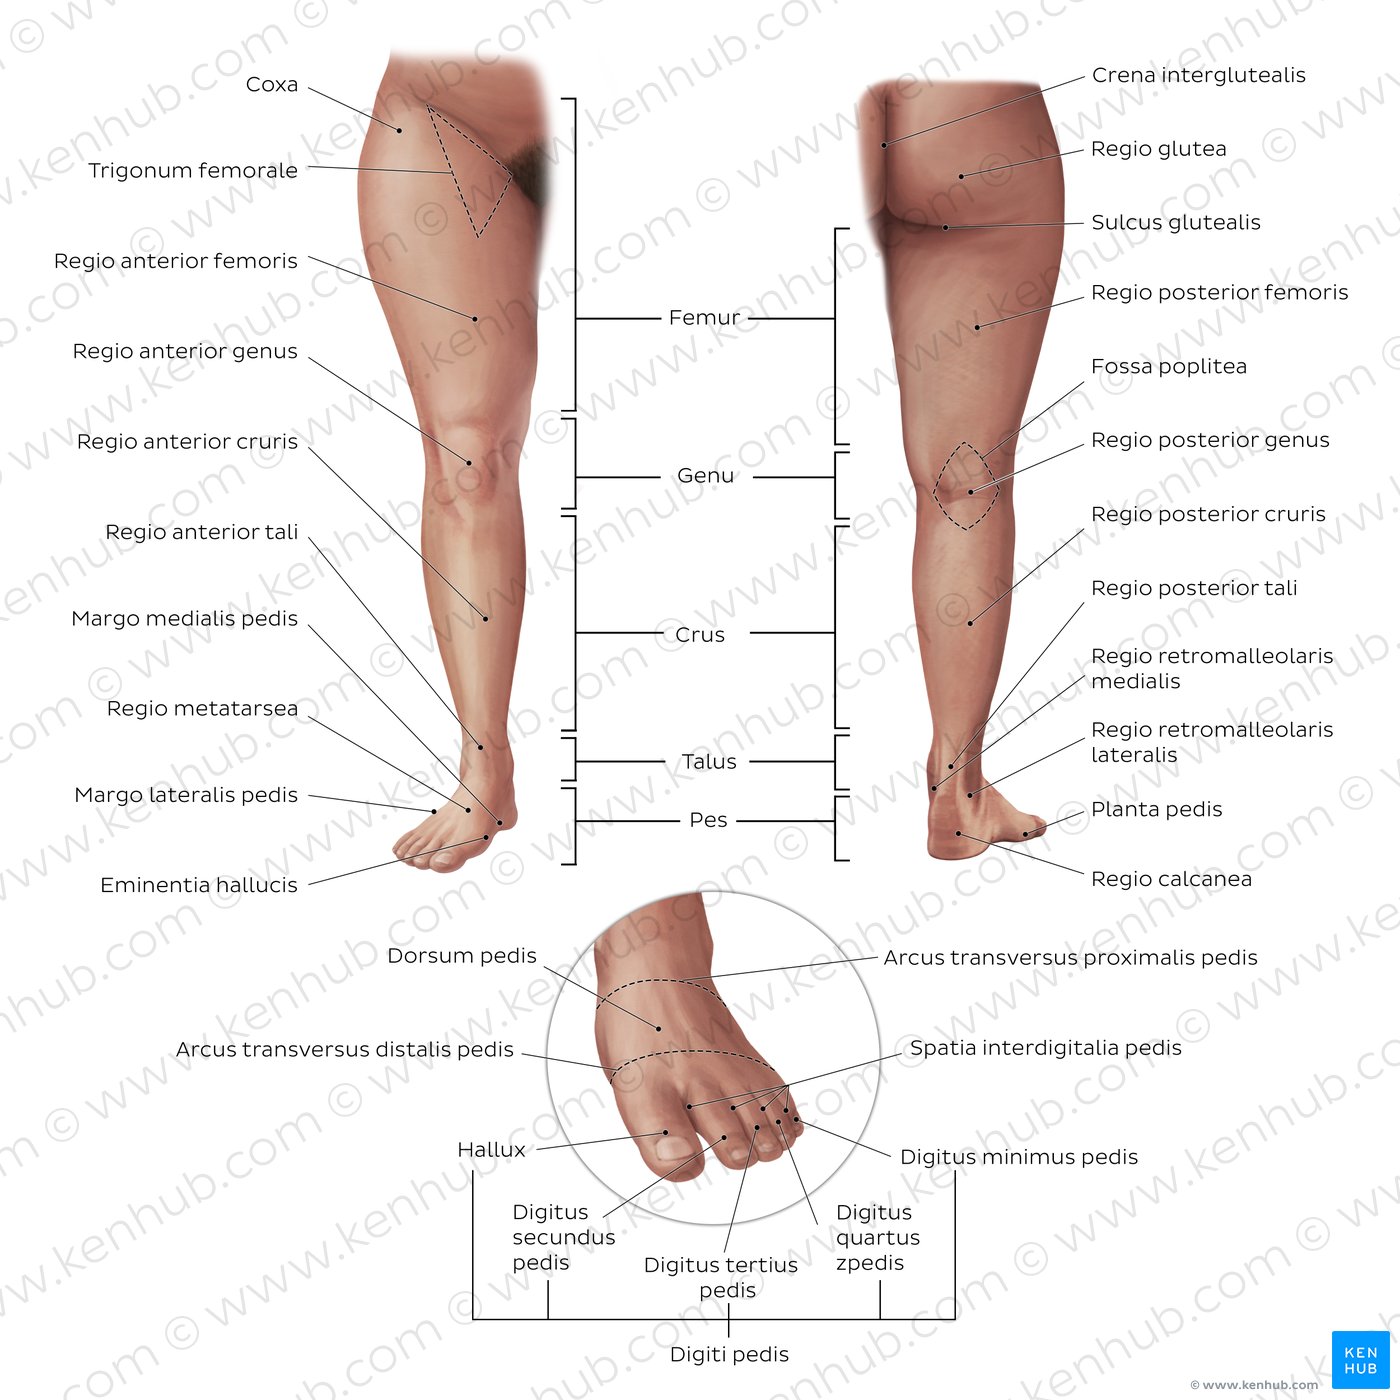 Regions of the lower extremity